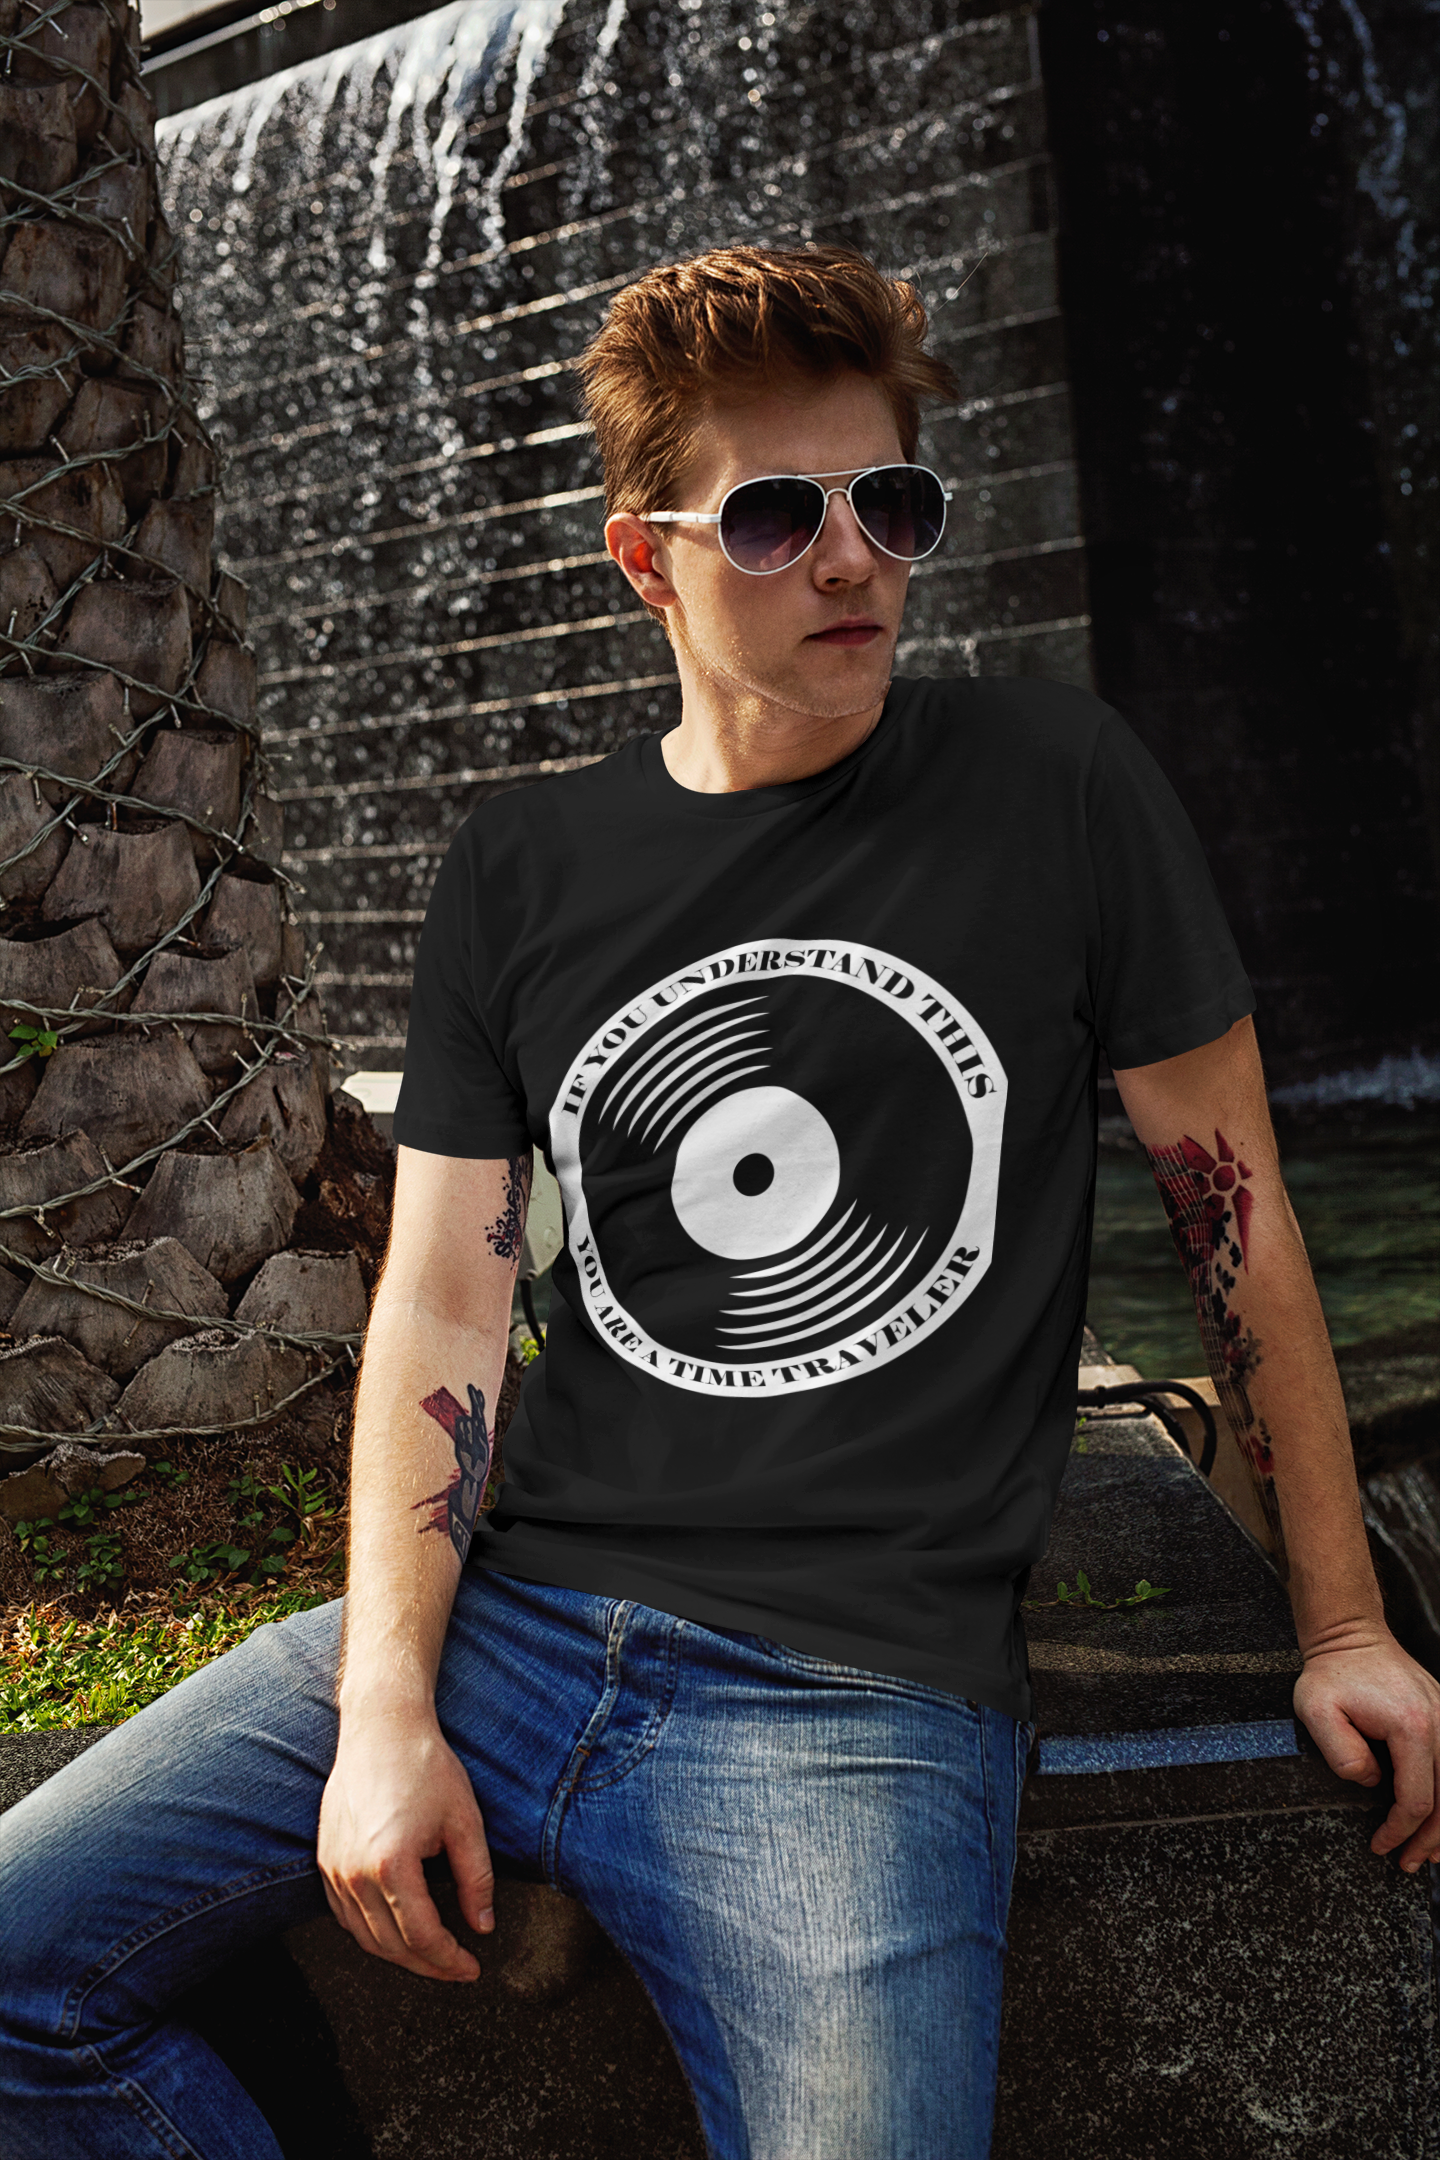 record collector rpm turntable vinyl music lover 33 45 78 short sleeve t shirt